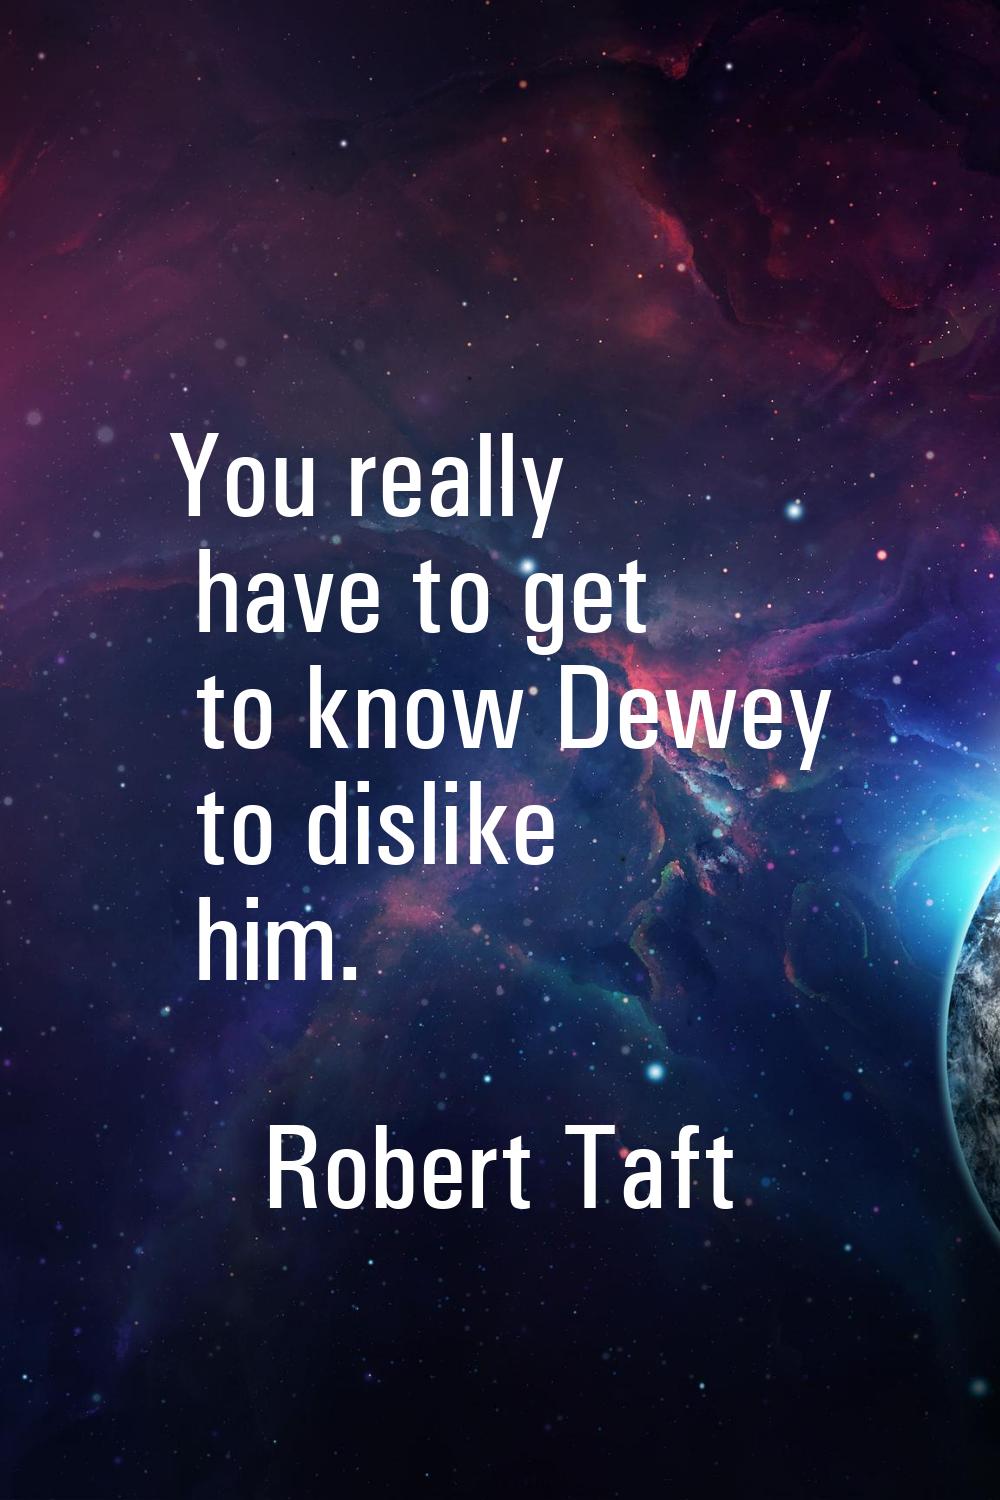 You really have to get to know Dewey to dislike him.